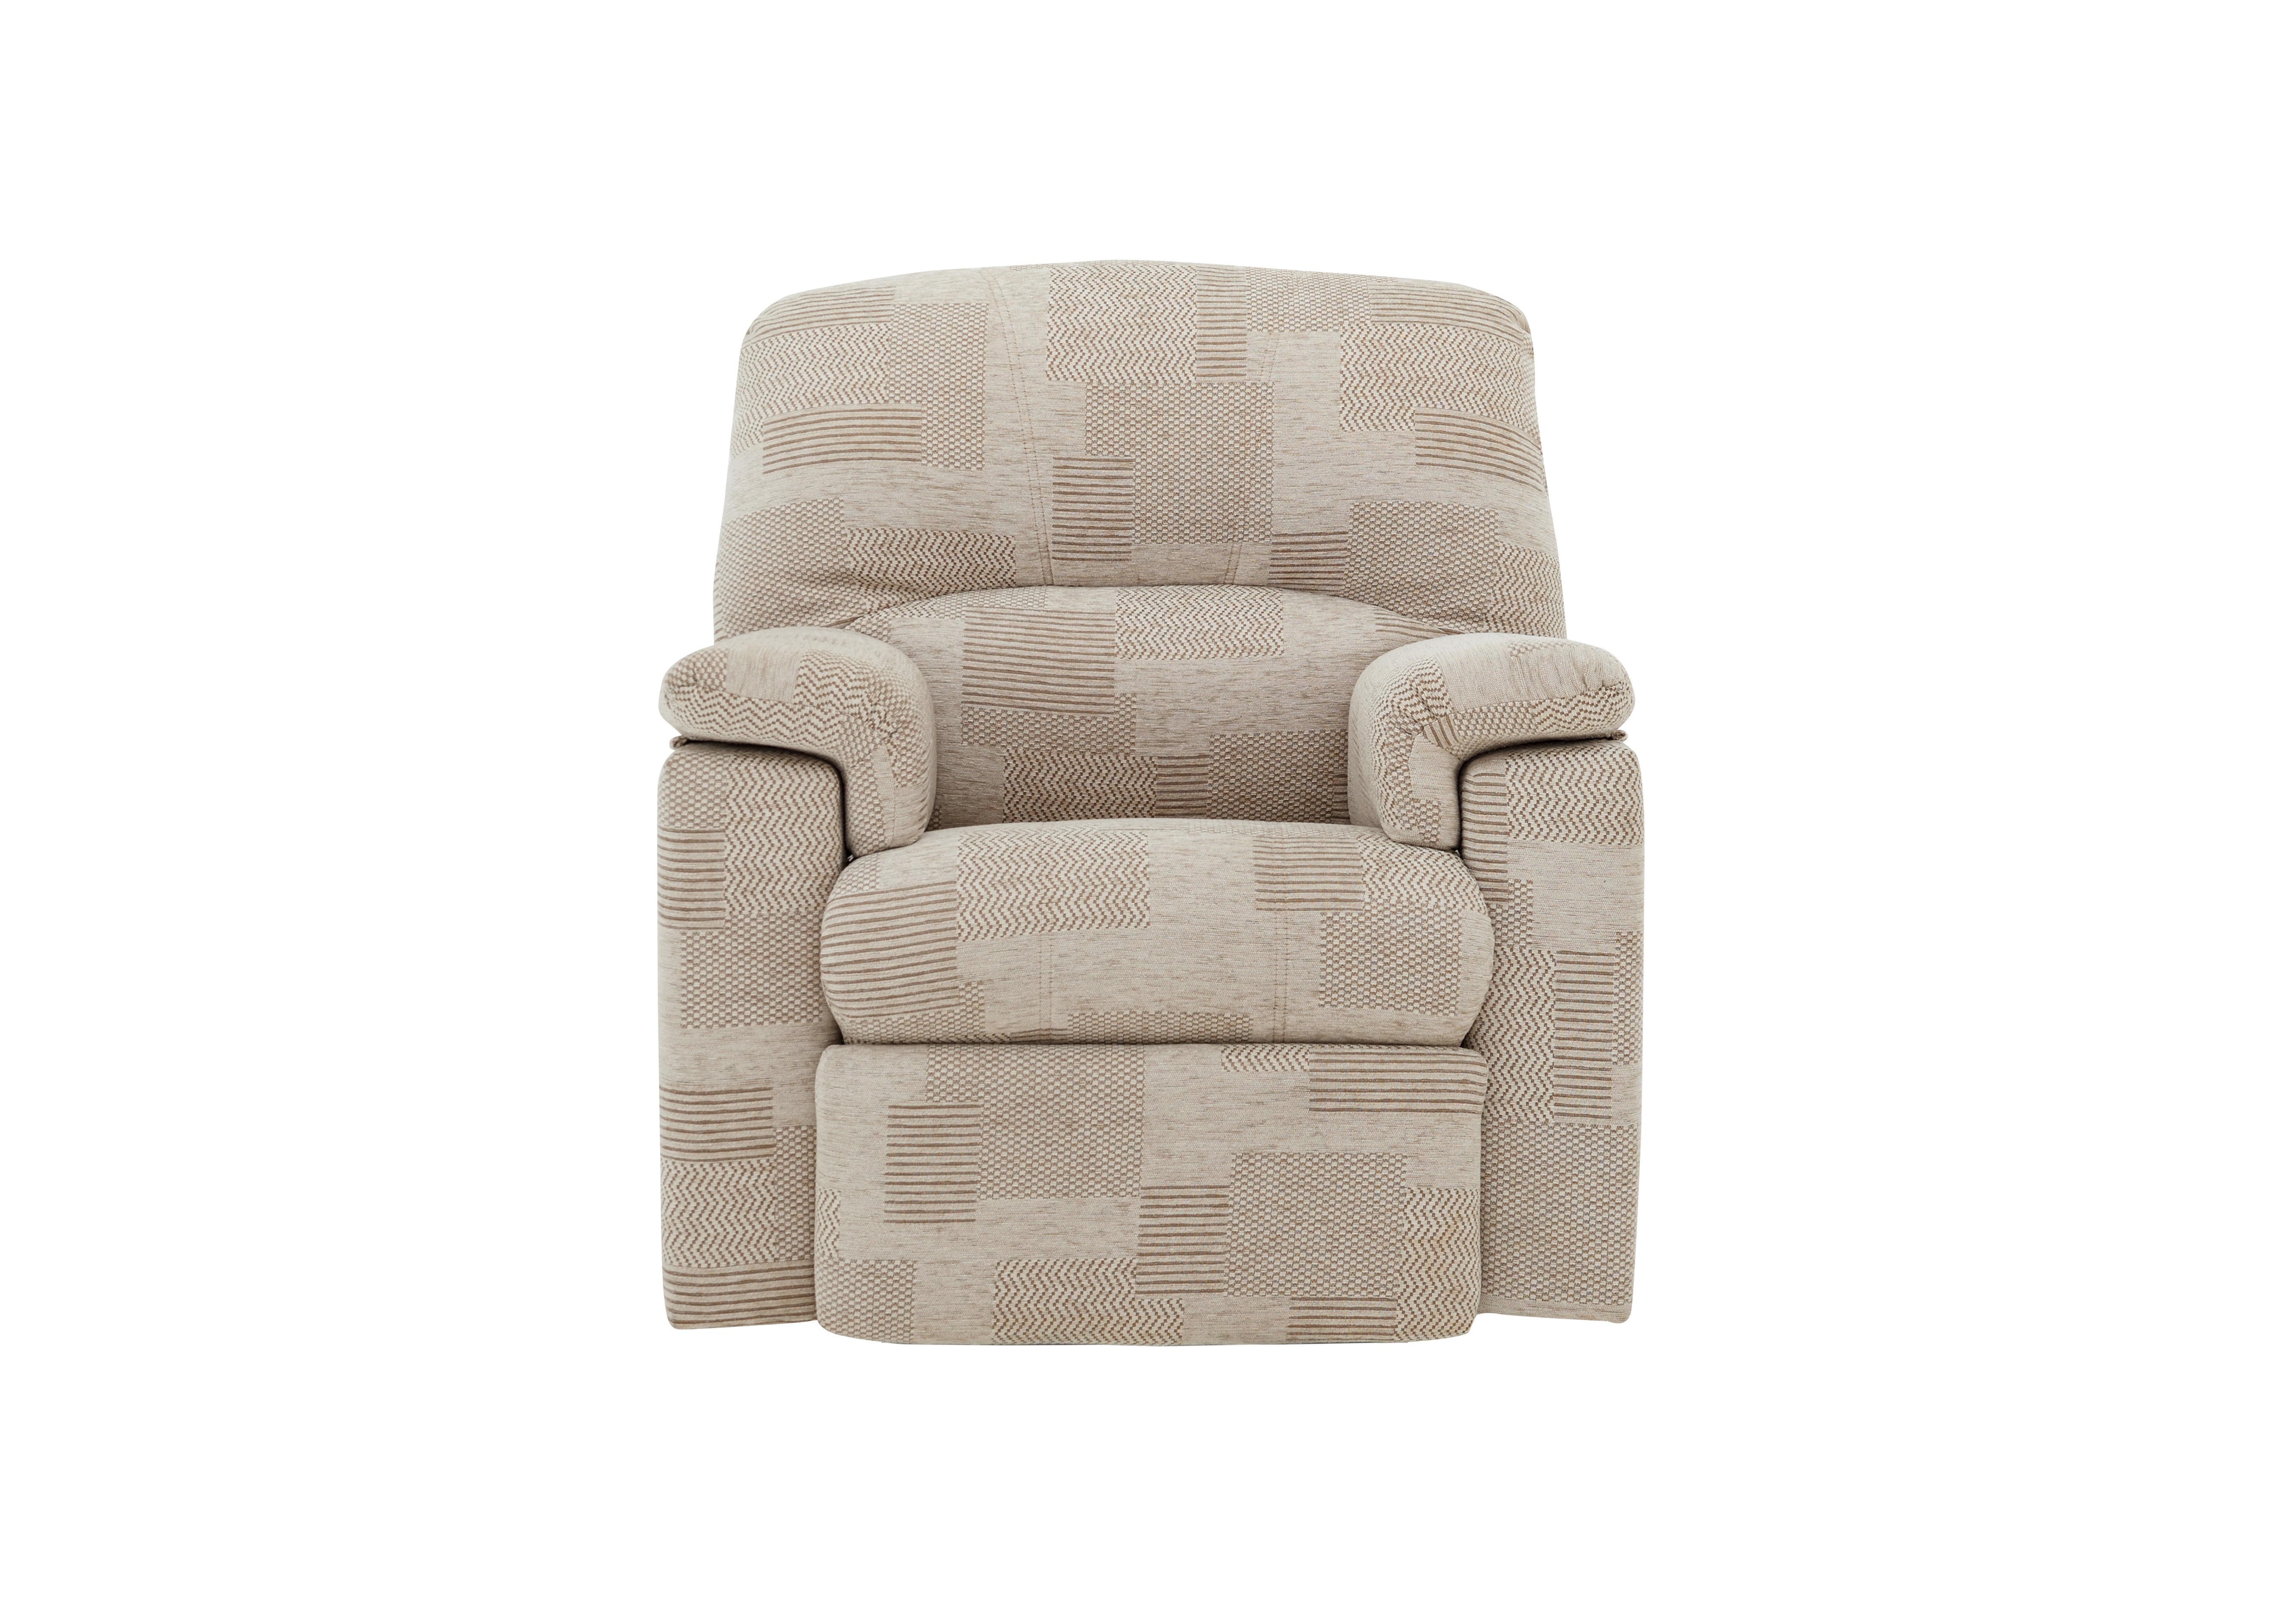 Chloe Small Fabric Armchair in C008 Checkers Putty on Furniture Village